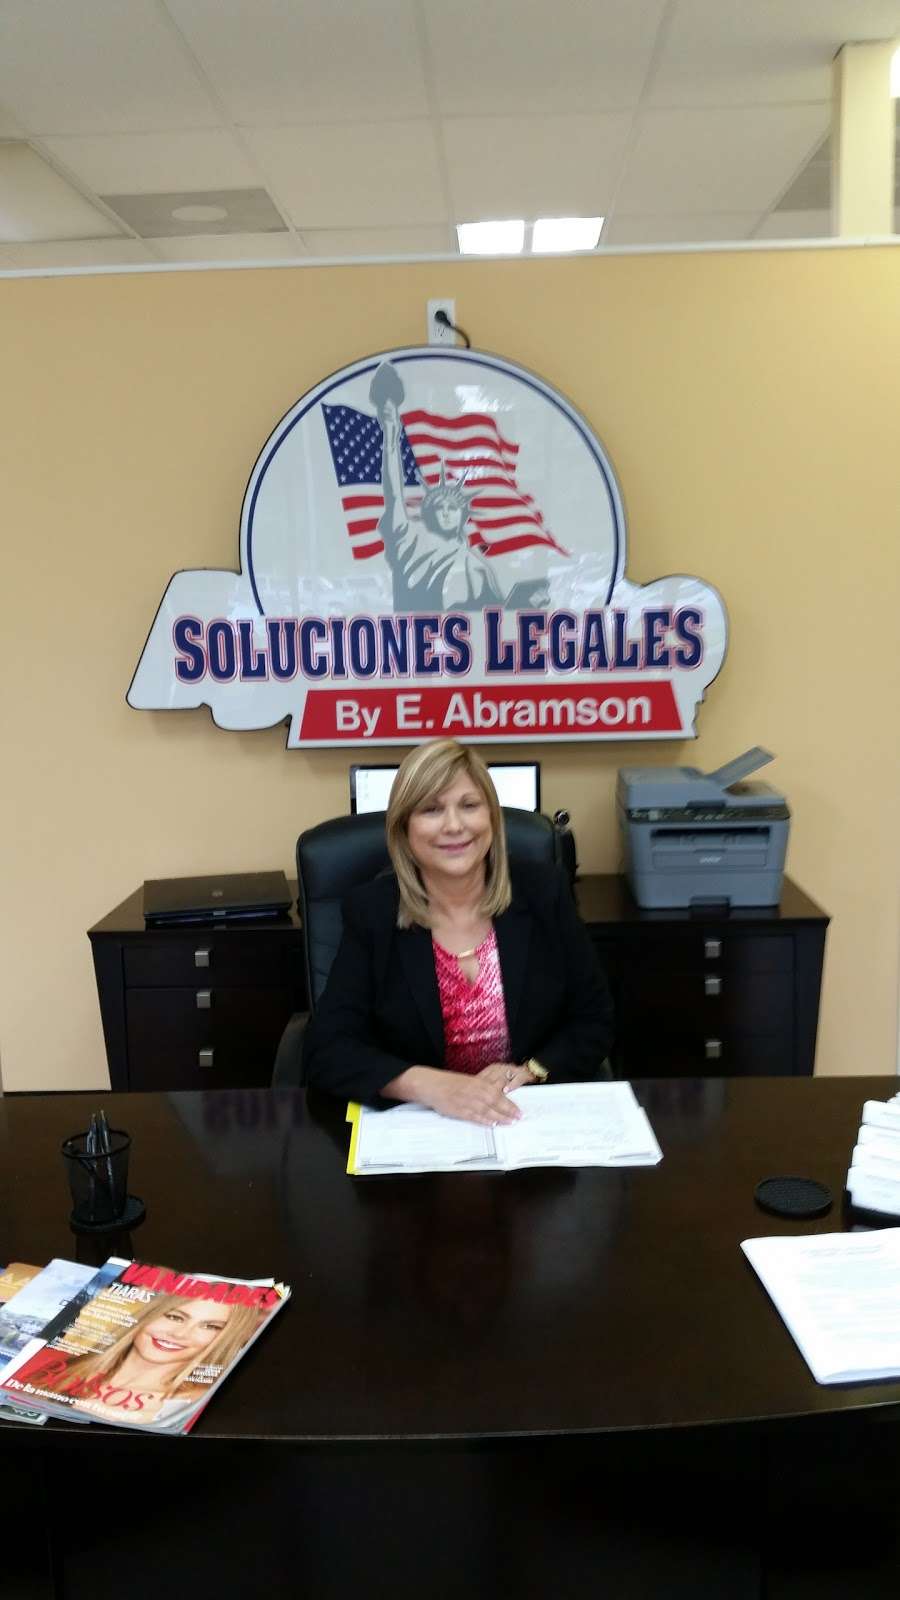 Soluciones Legales by E. Abramson | 14587 Southern Blvd, Loxahatchee Groves, FL 33470 | Phone: (866) 820-3388